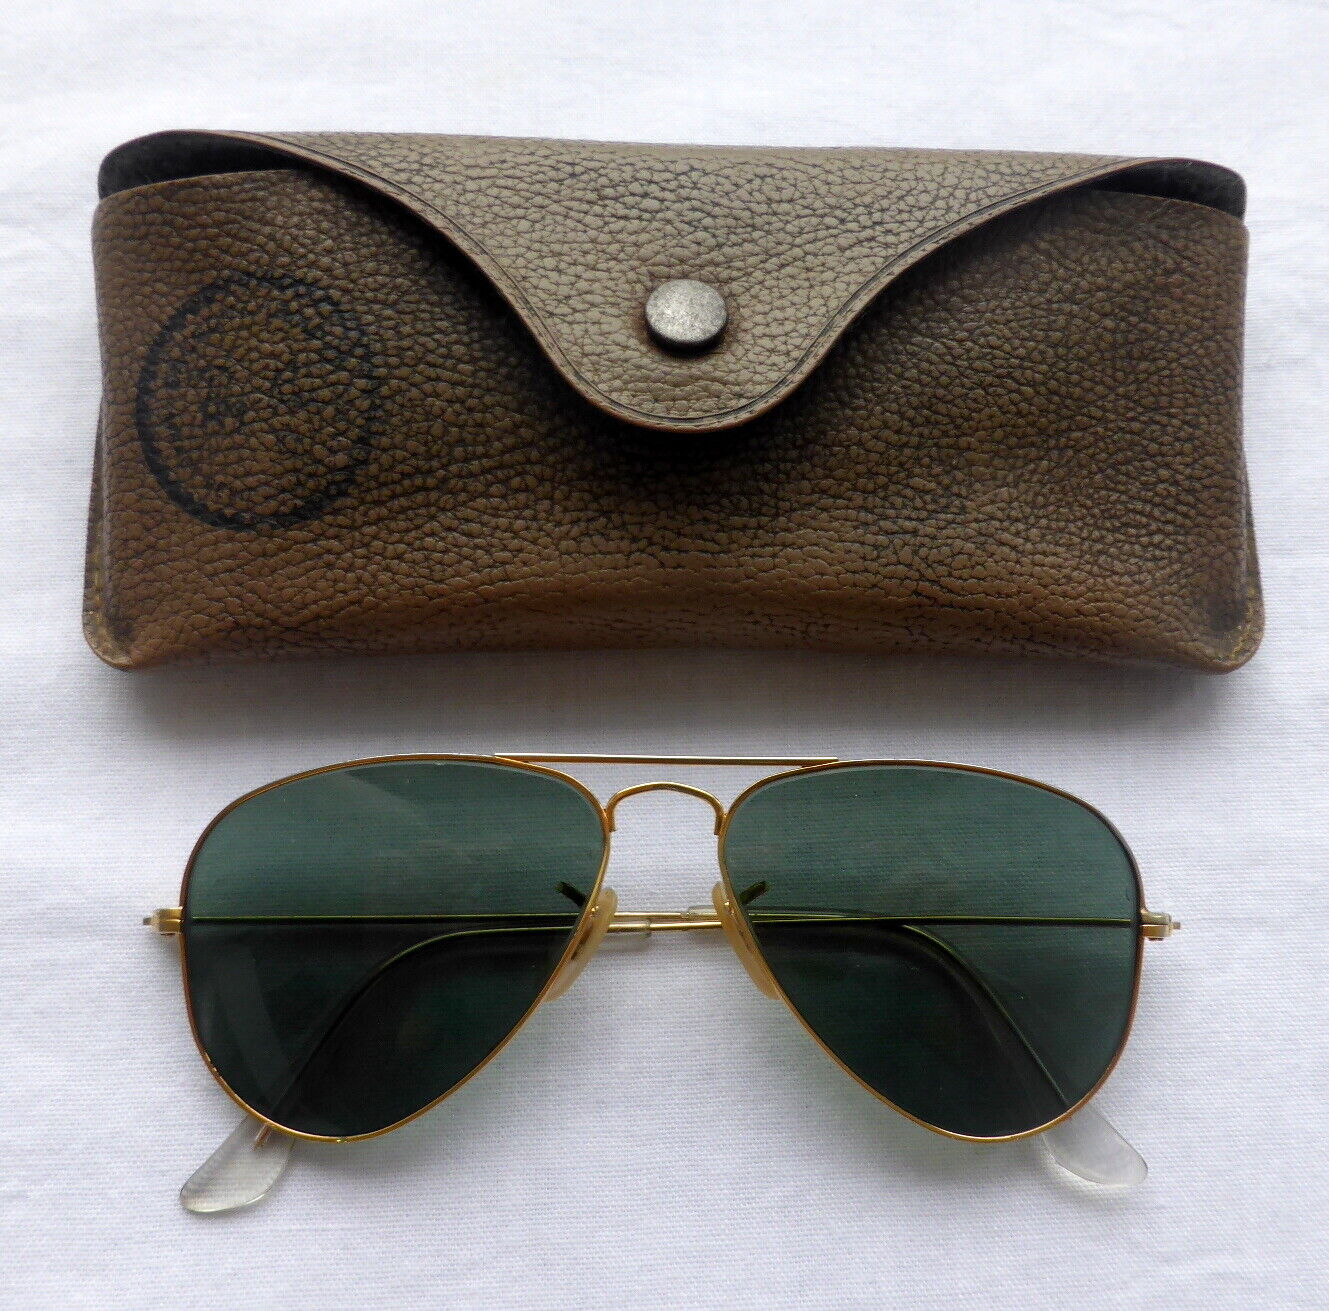 Vintage B&L RAY BAN aviator 52-14 sunglasses with case